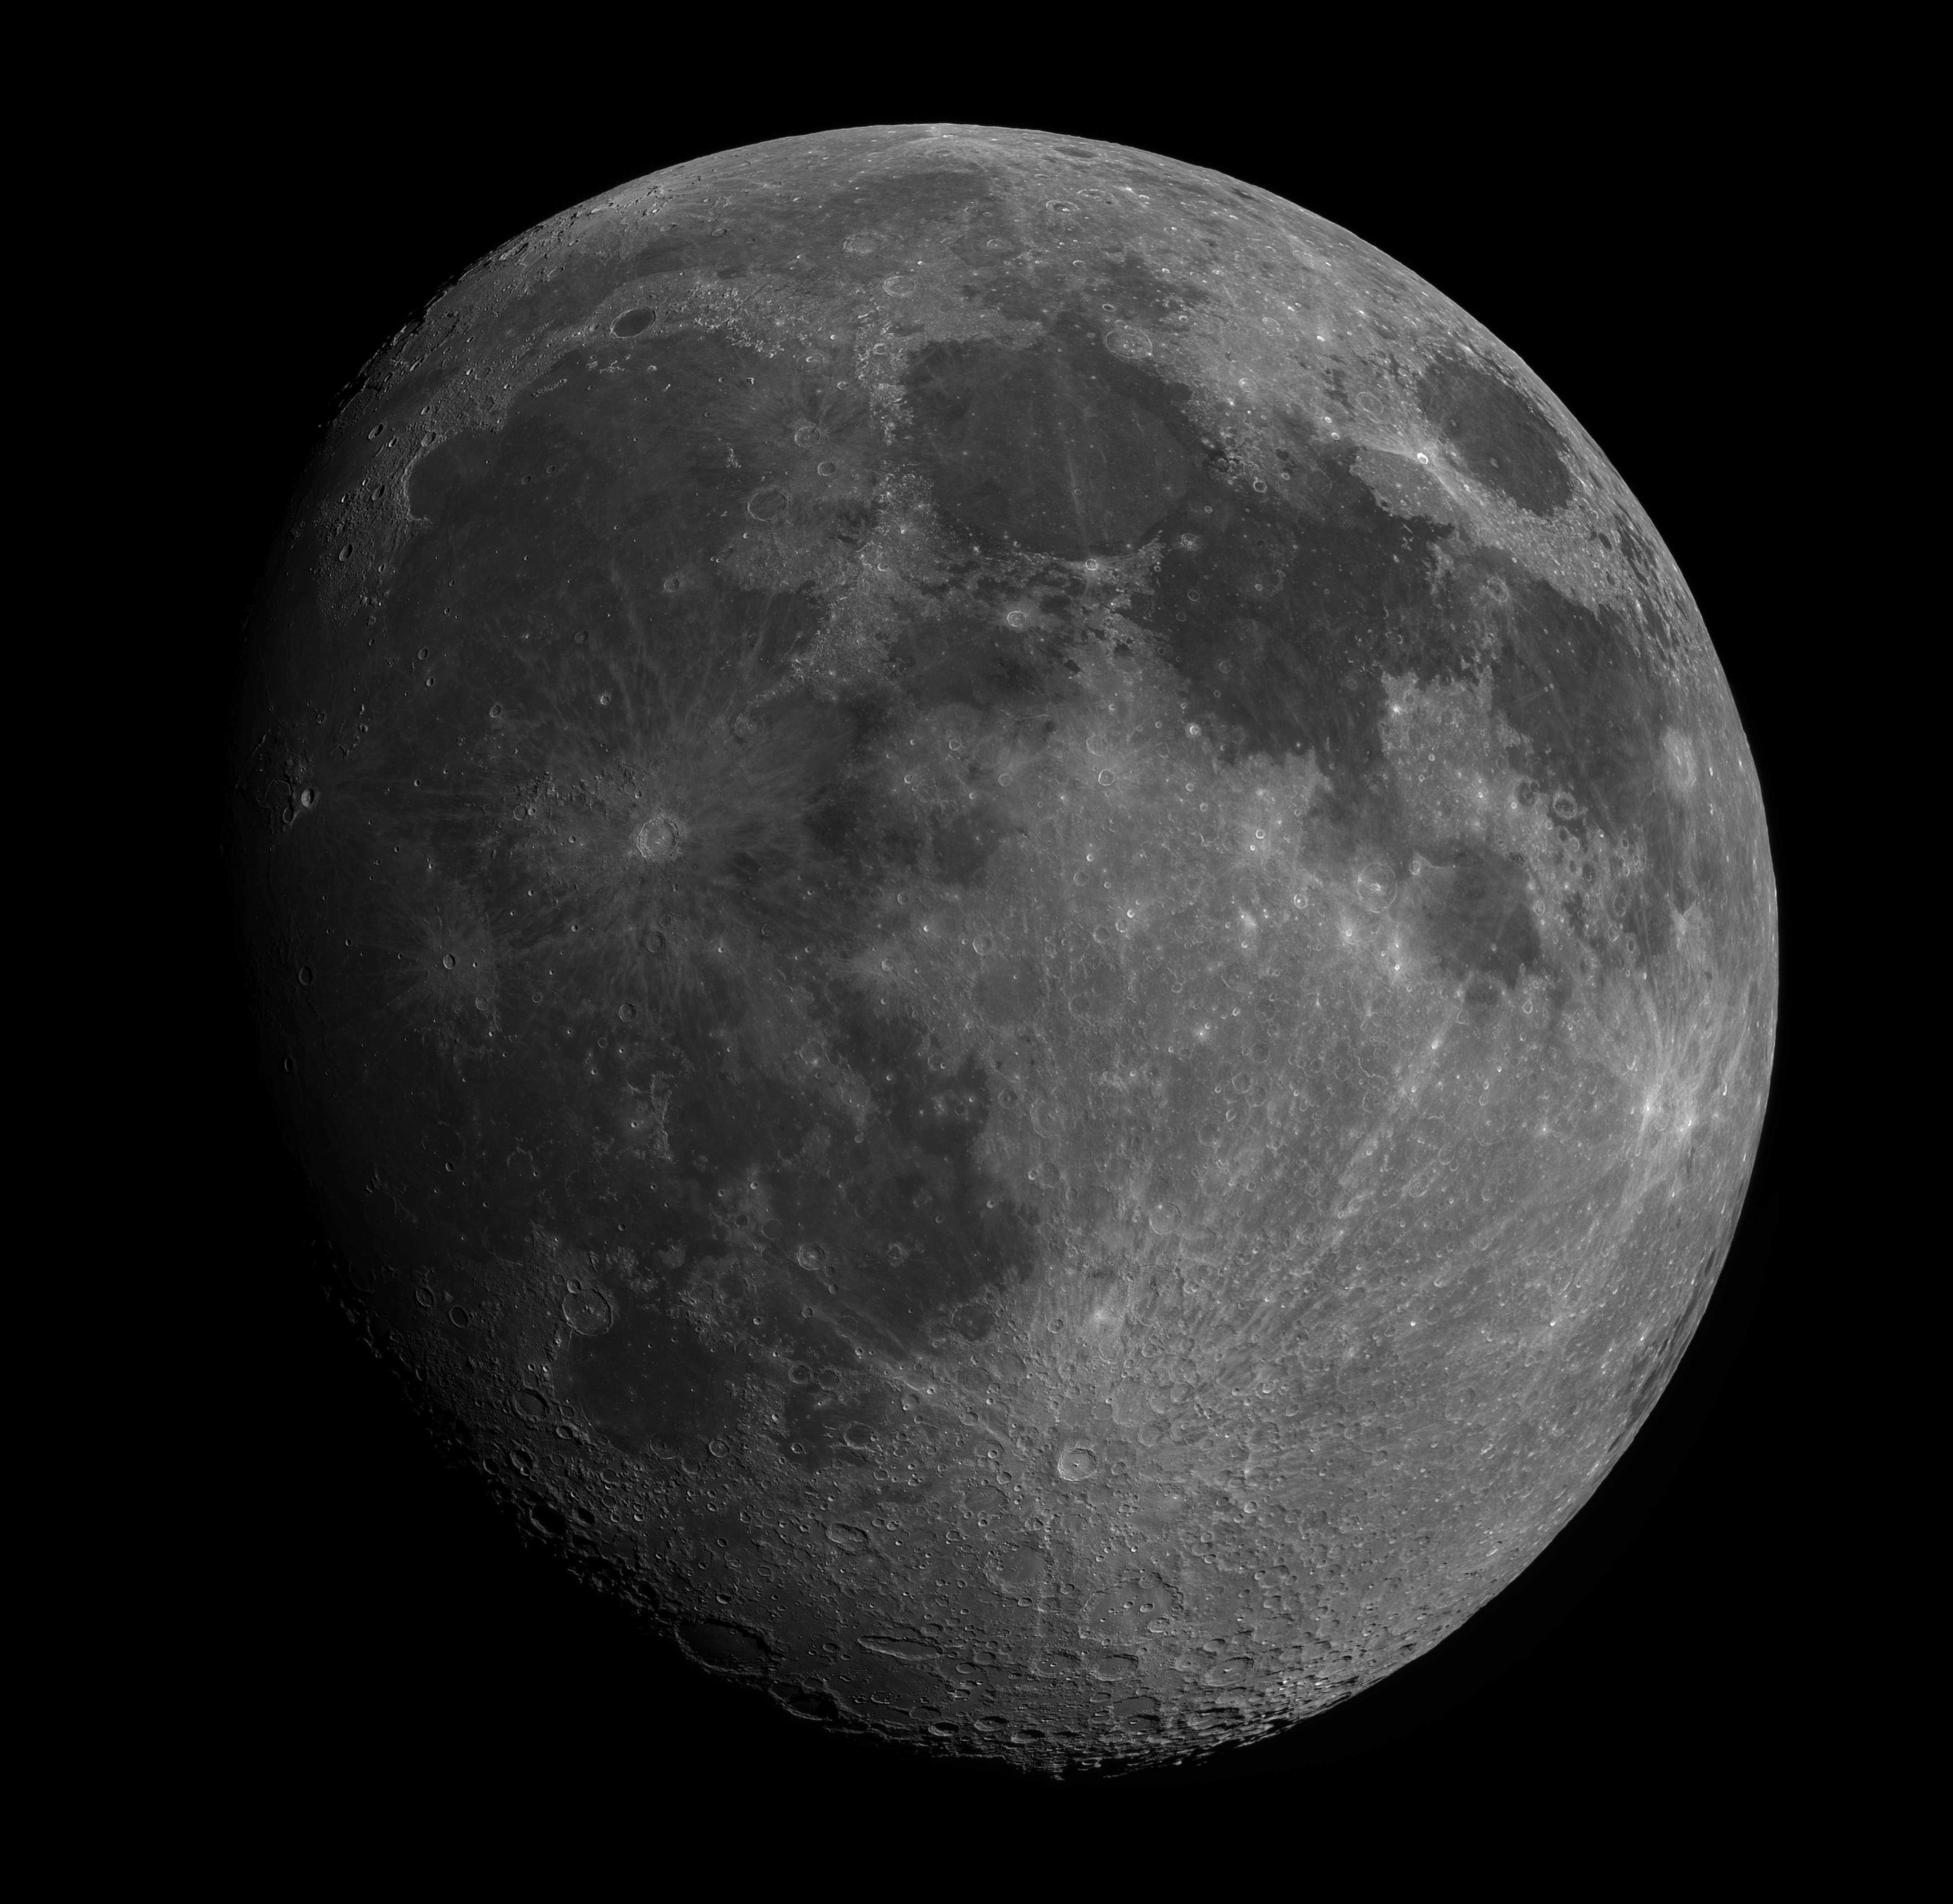 Neil-Webster-MOON-April-13th-2022-Waxing-Gibbous-87-11.23-days